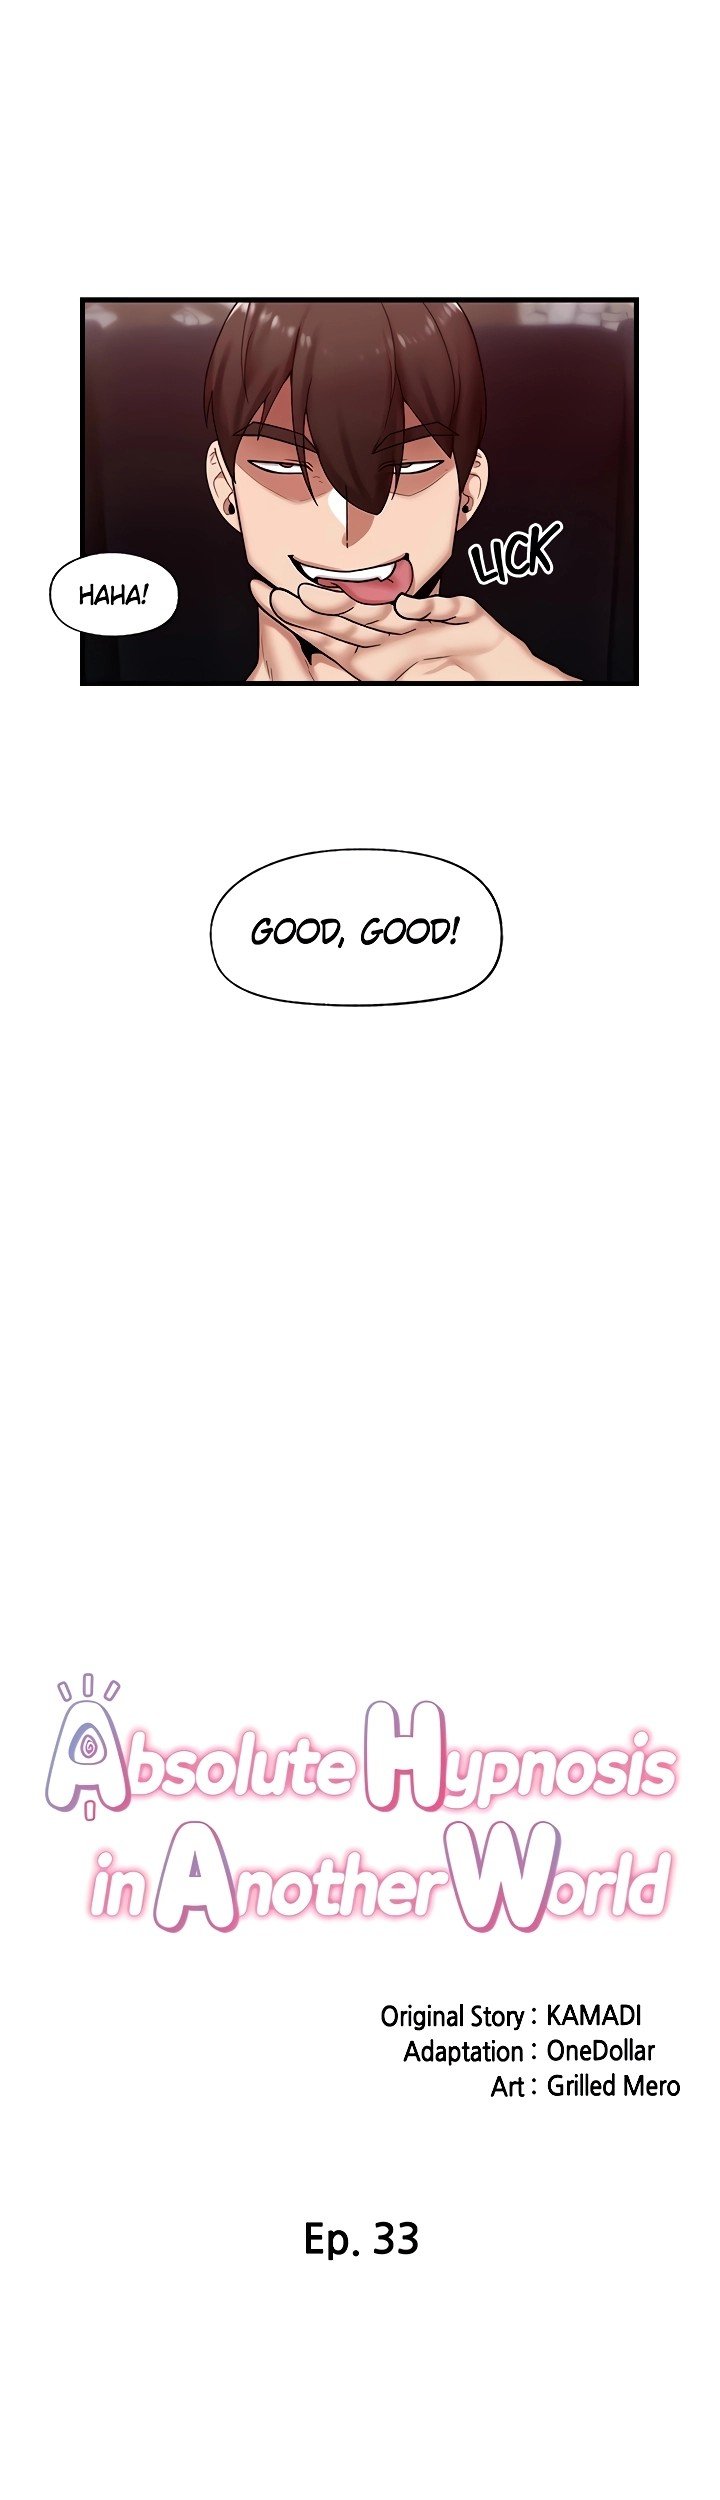 absolute-hypnosis-in-another-world-chap-33-7